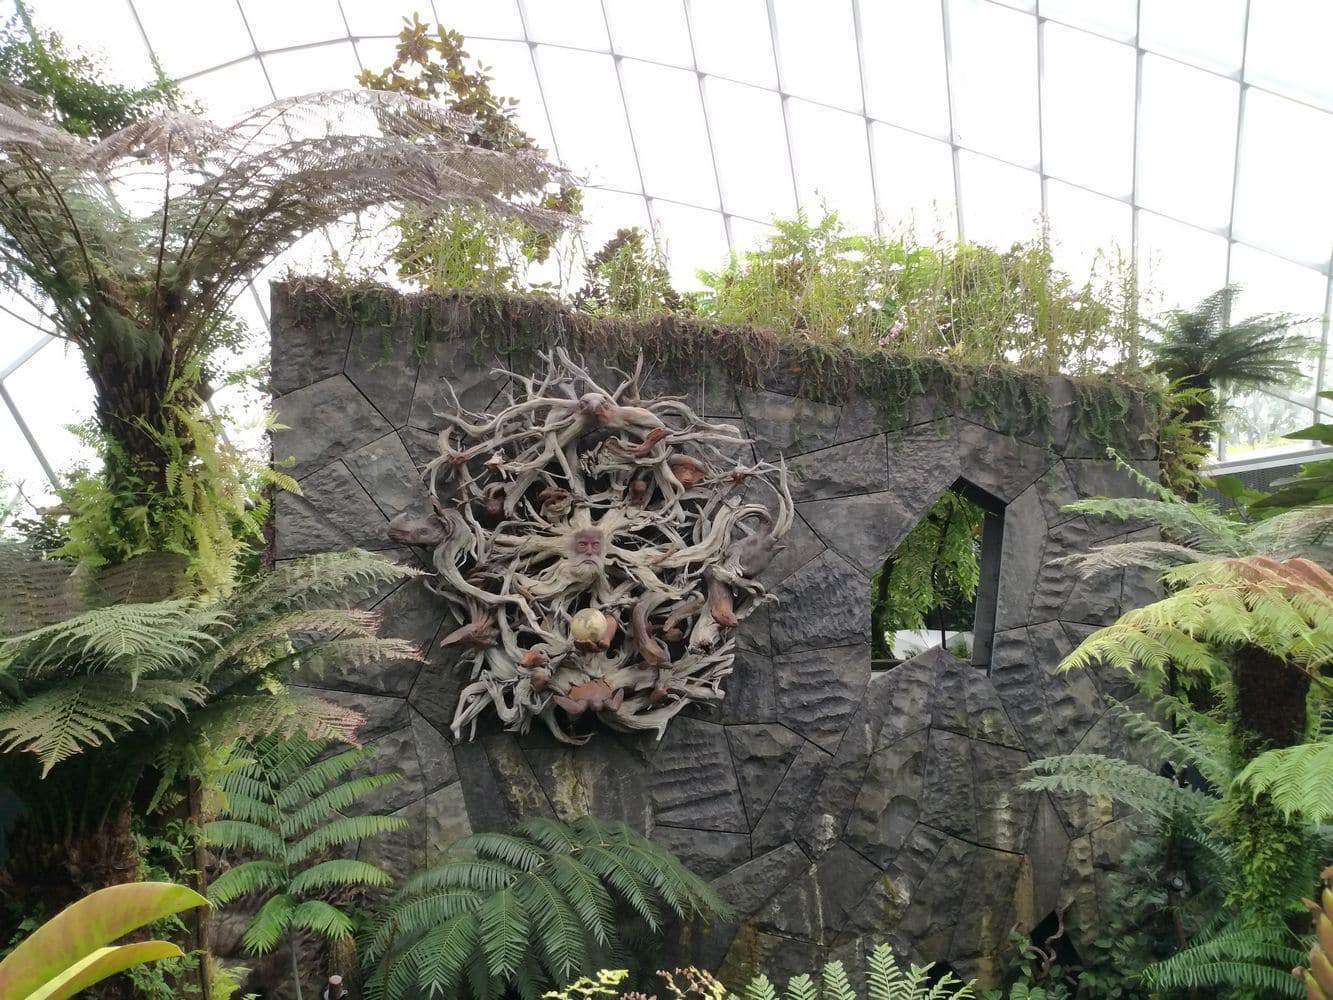 Cloud Forest - Ticket Price & Entrance Fee, Gardens by the Bay Singapore